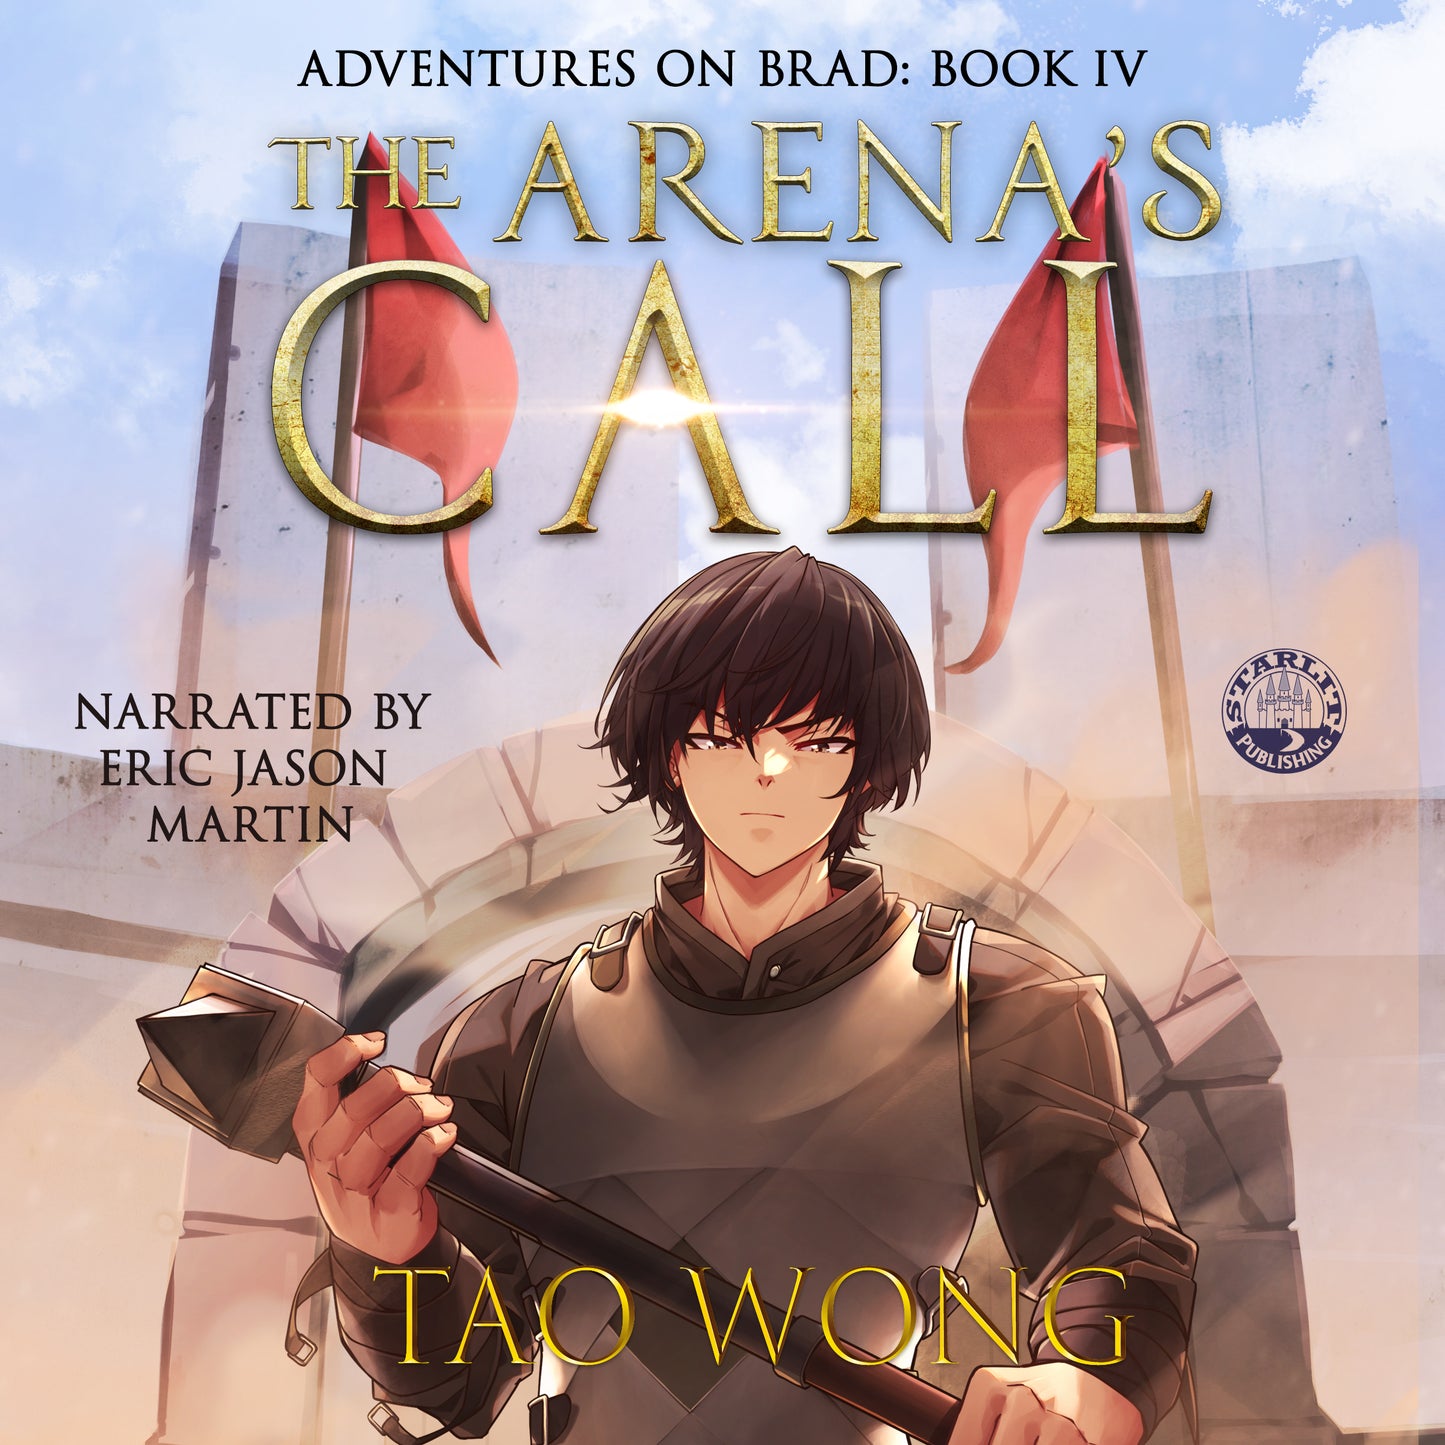 The Arena's Call (Adventures on Brad #4)